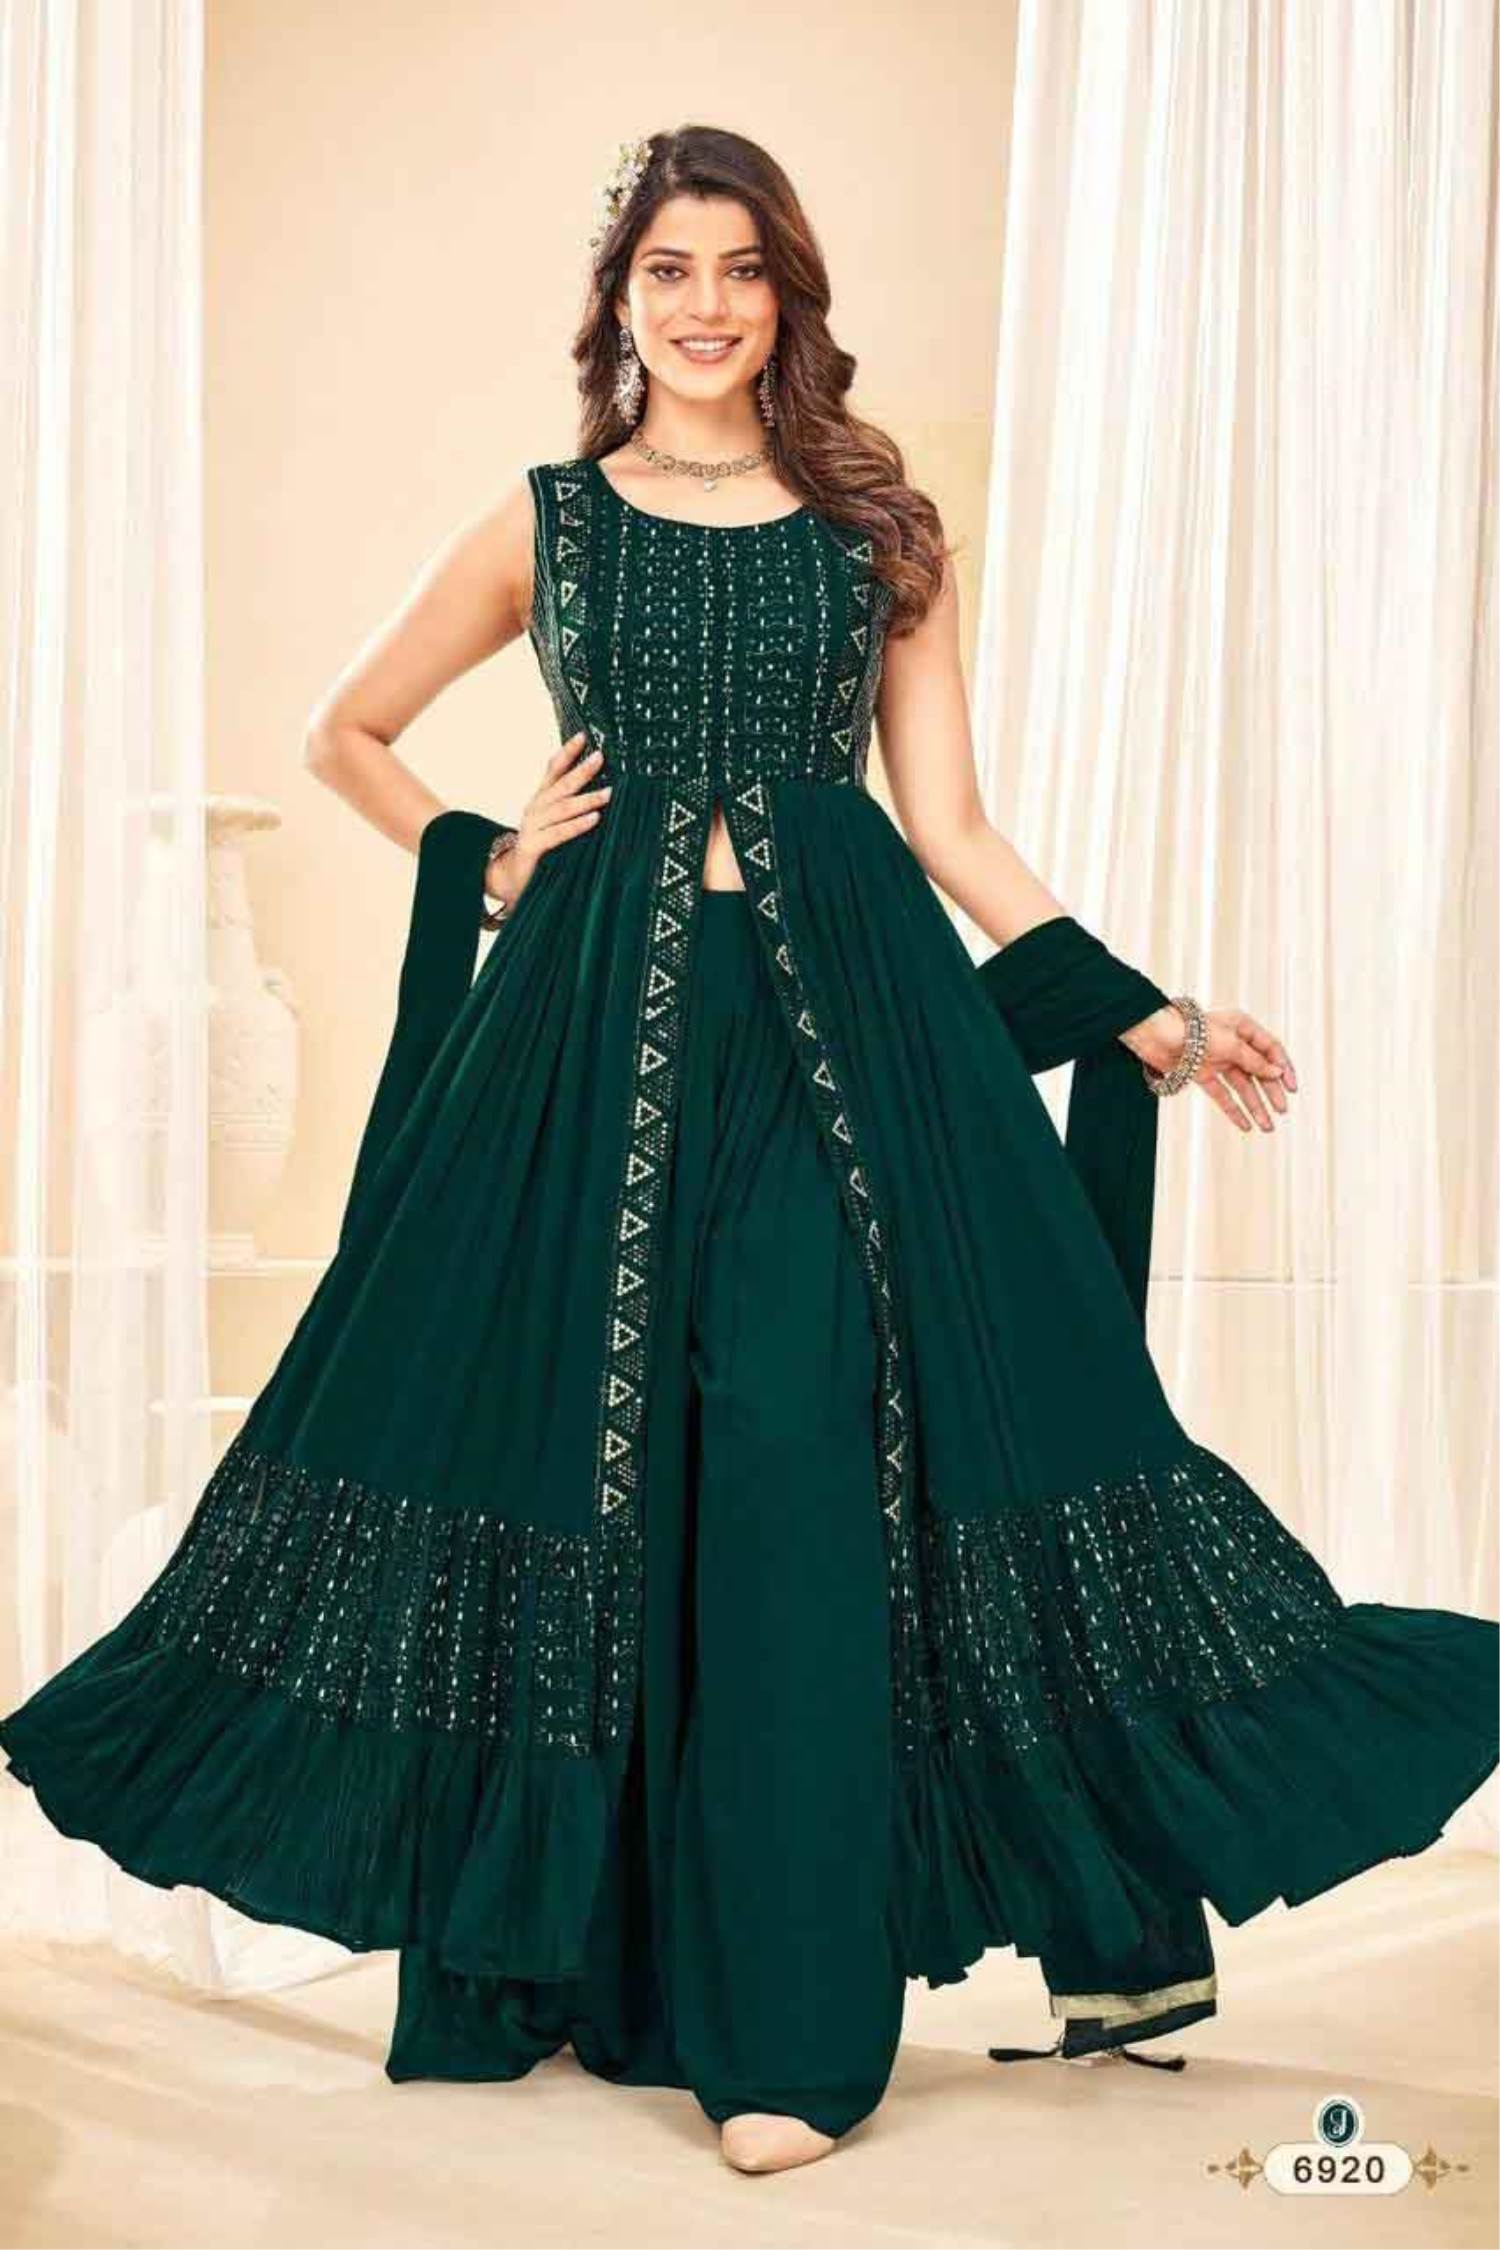 Sets & Dresses | Buy Sets & Dresses Online in India - W for Woman